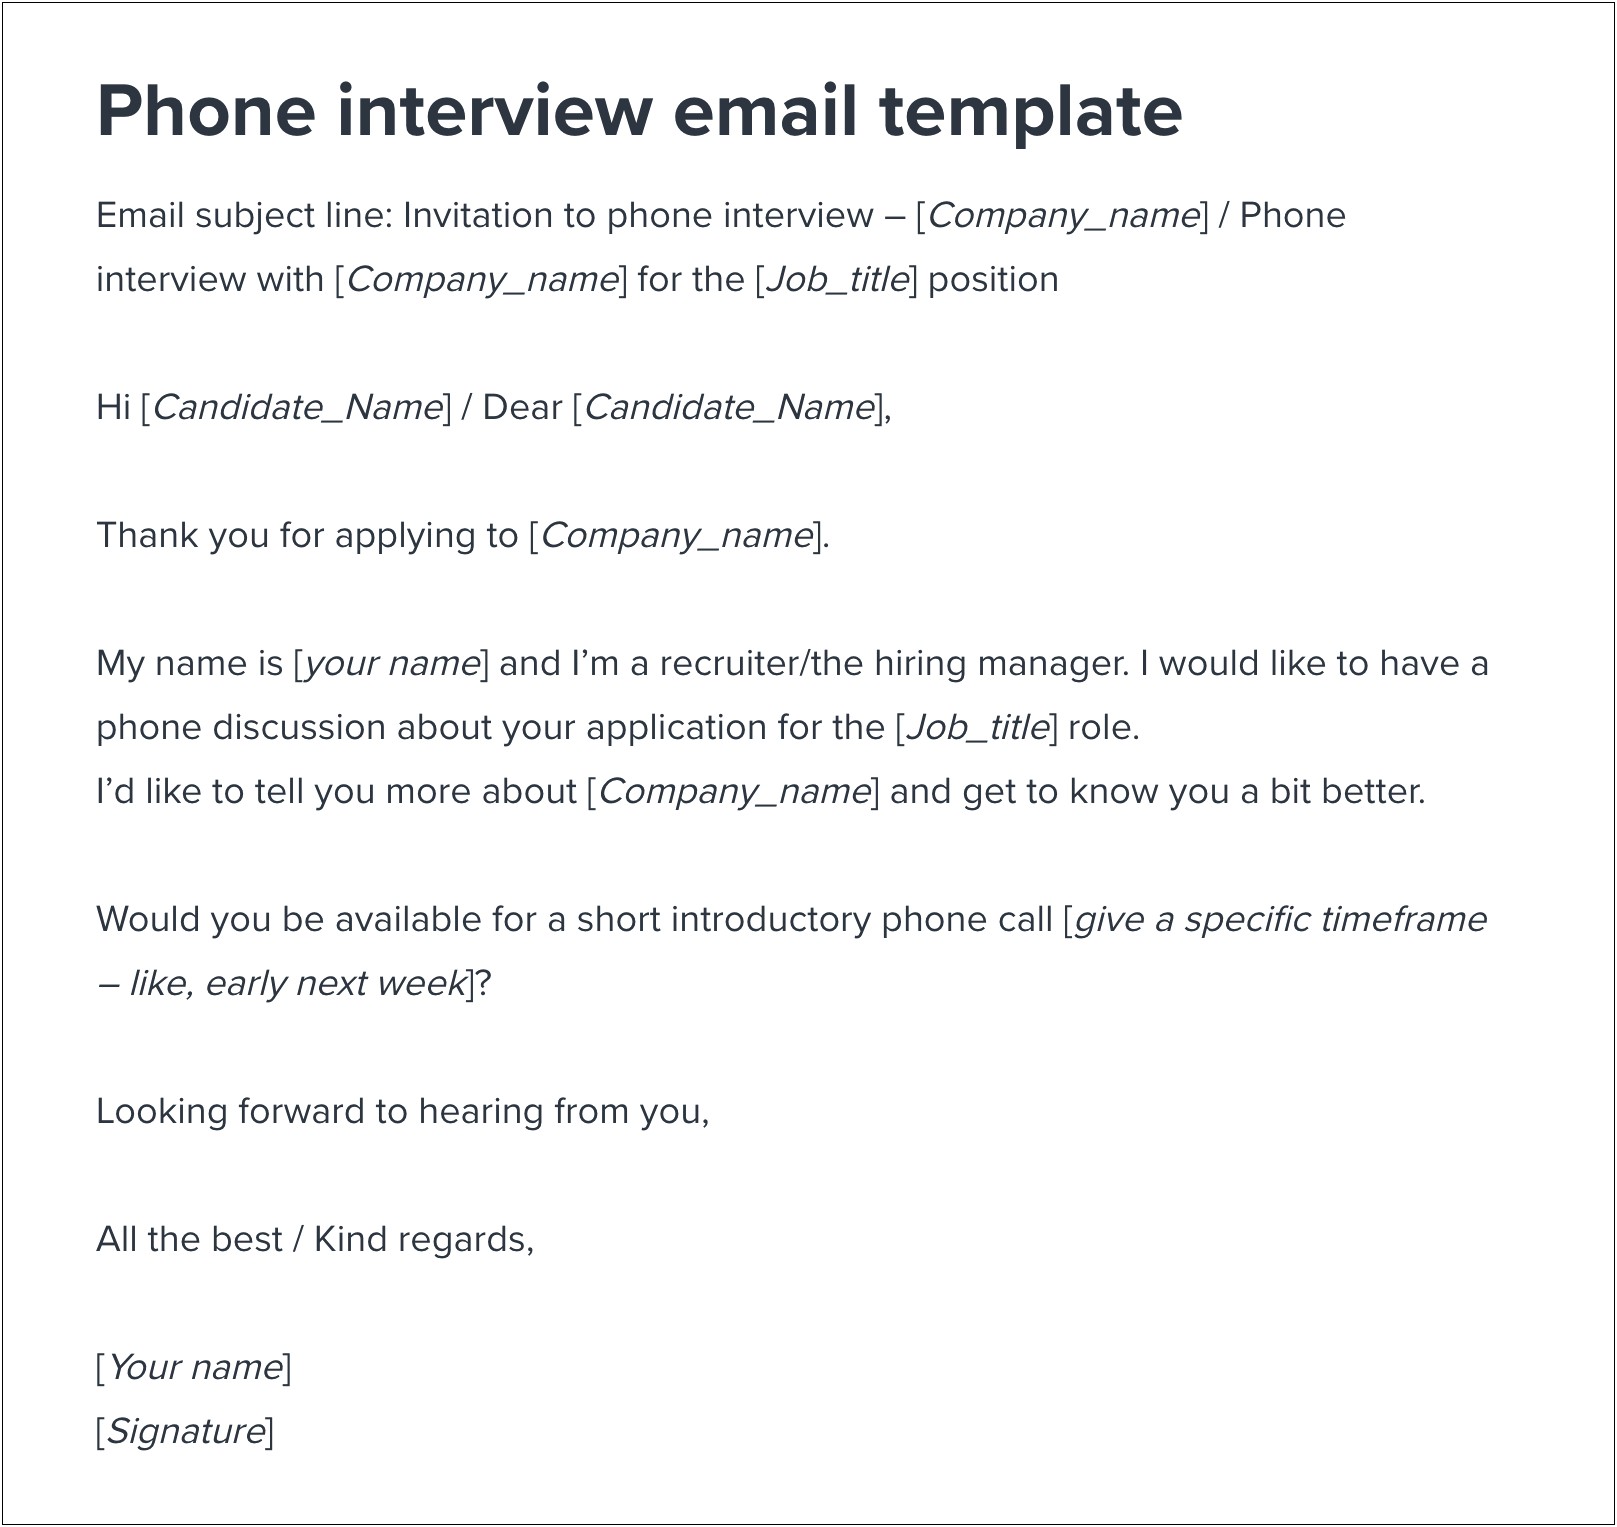 Resume Description Handle Phone Calls Mail And Emails